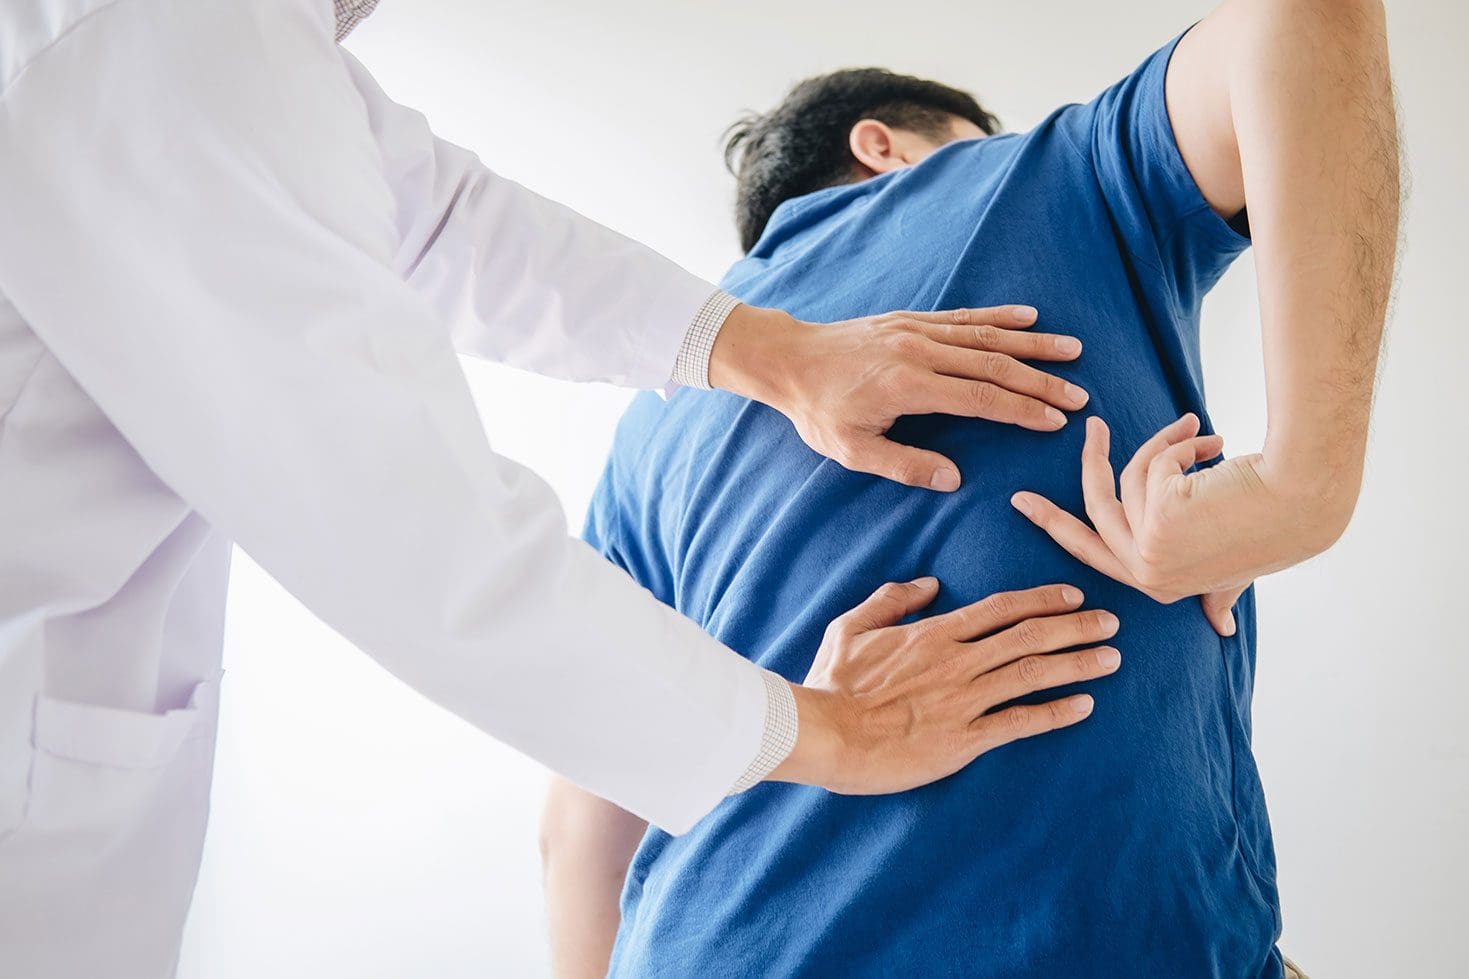 A chiropractor examines a patients lower back to determine treatment for back pain.